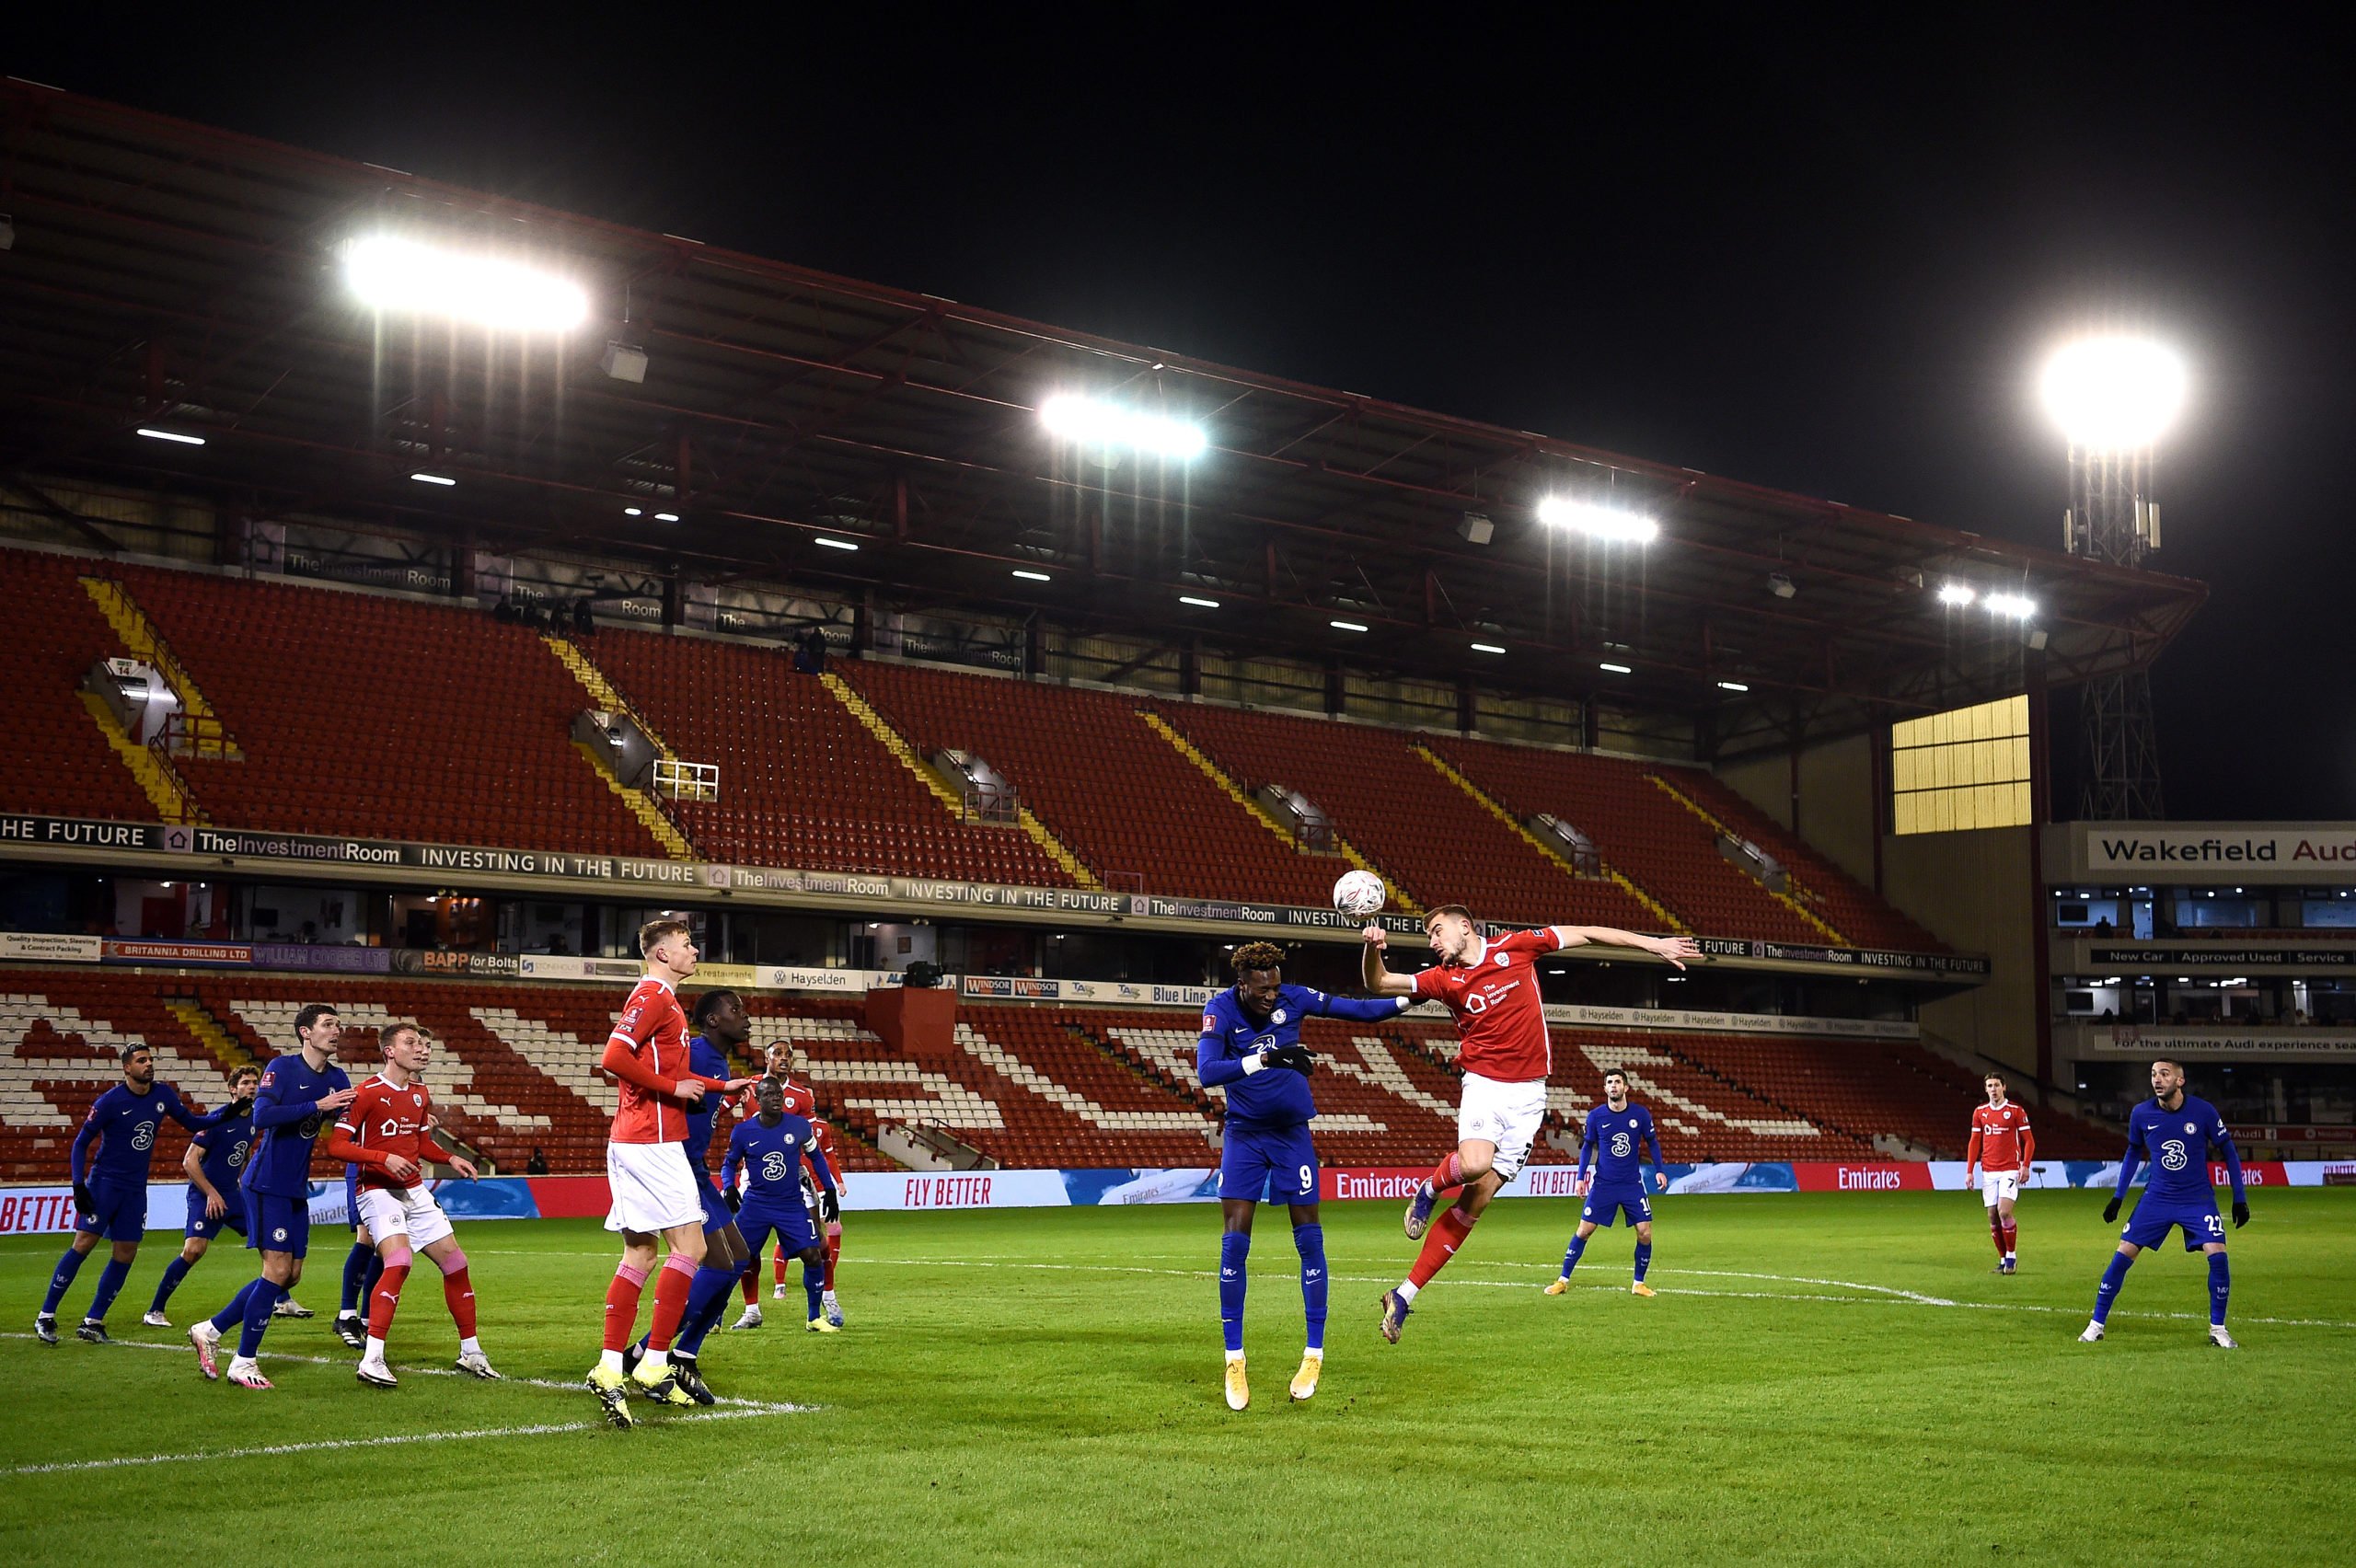 Chelsea Players Rated In Narrow Win Vs Barnsley (Chelsea players are in action in the photo)